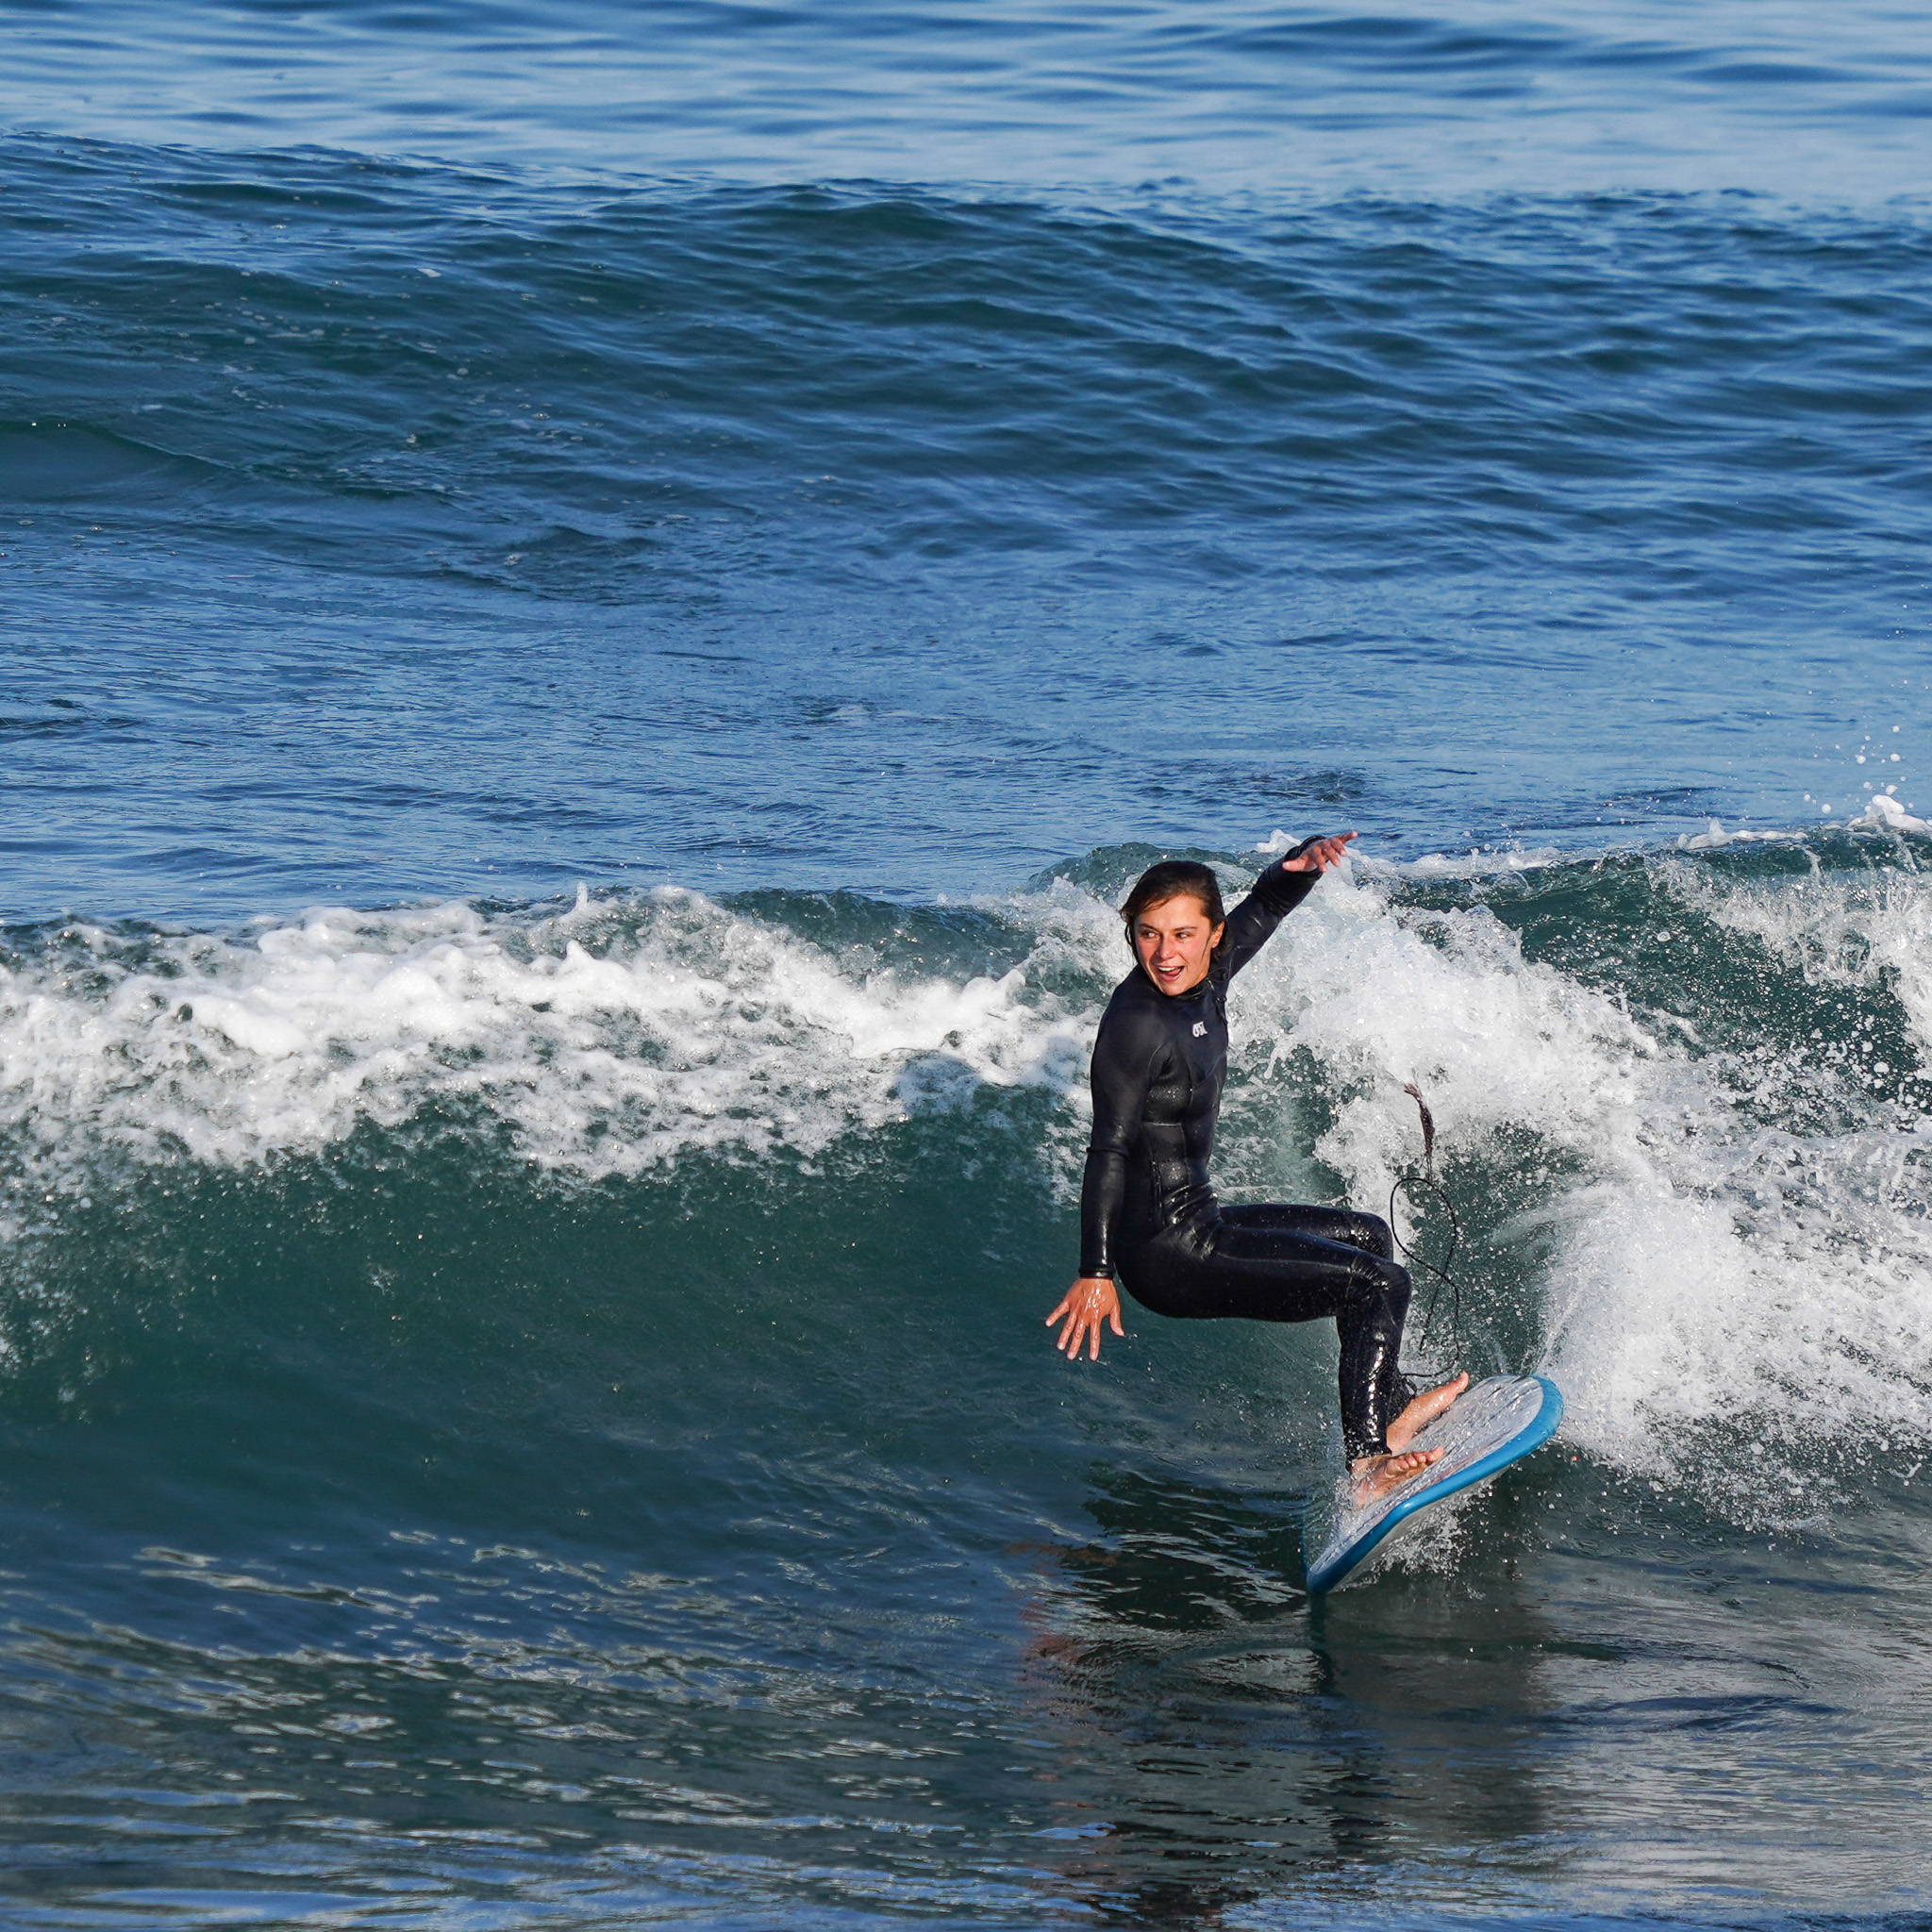 Marie surfing our performance Softtop Foamie Fish Board